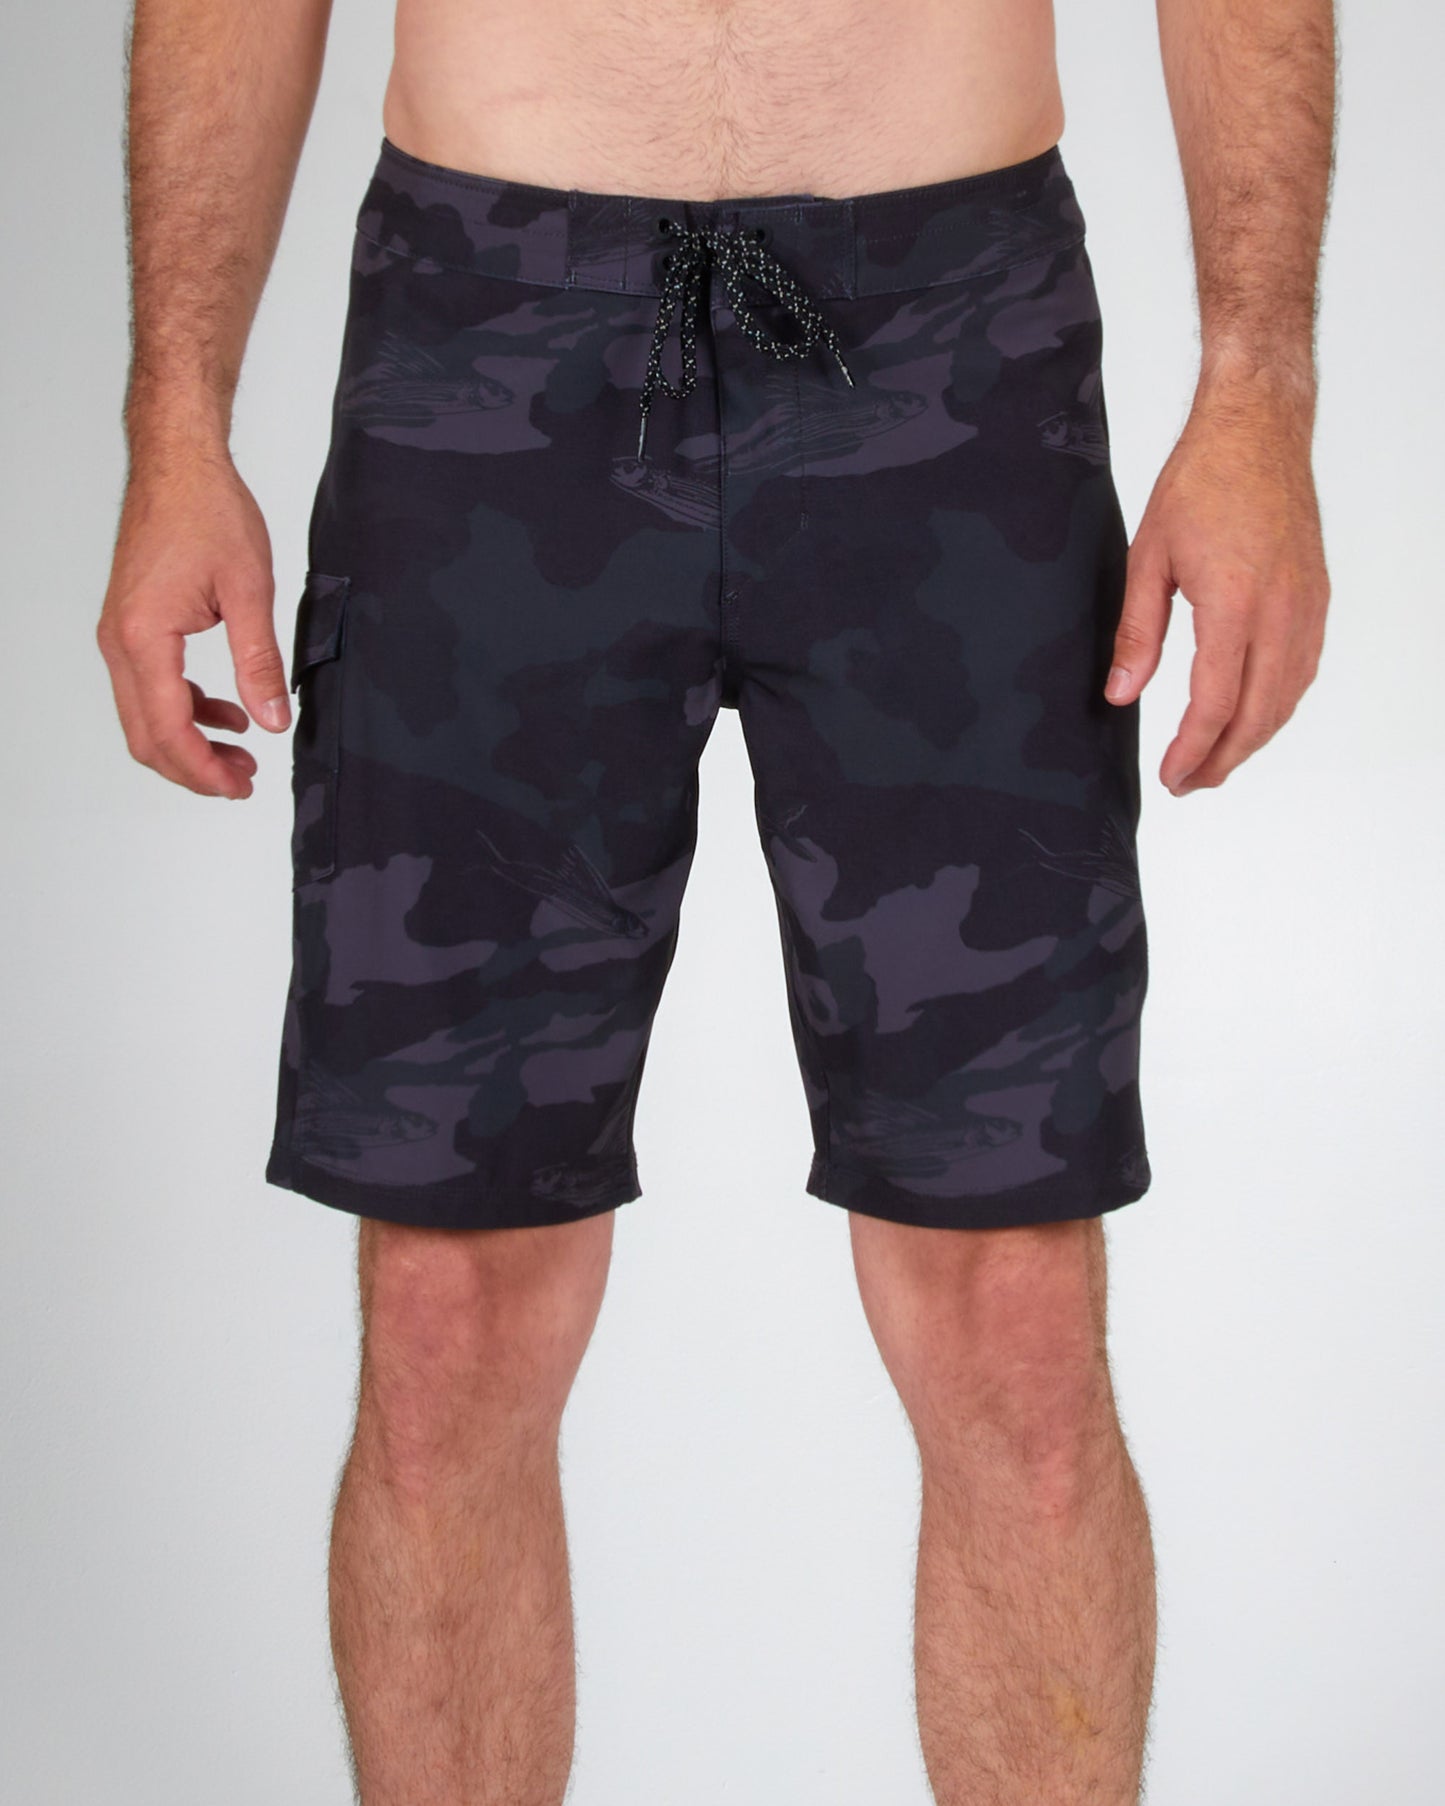 on body front of the Lowtide Black Camo Boardshort